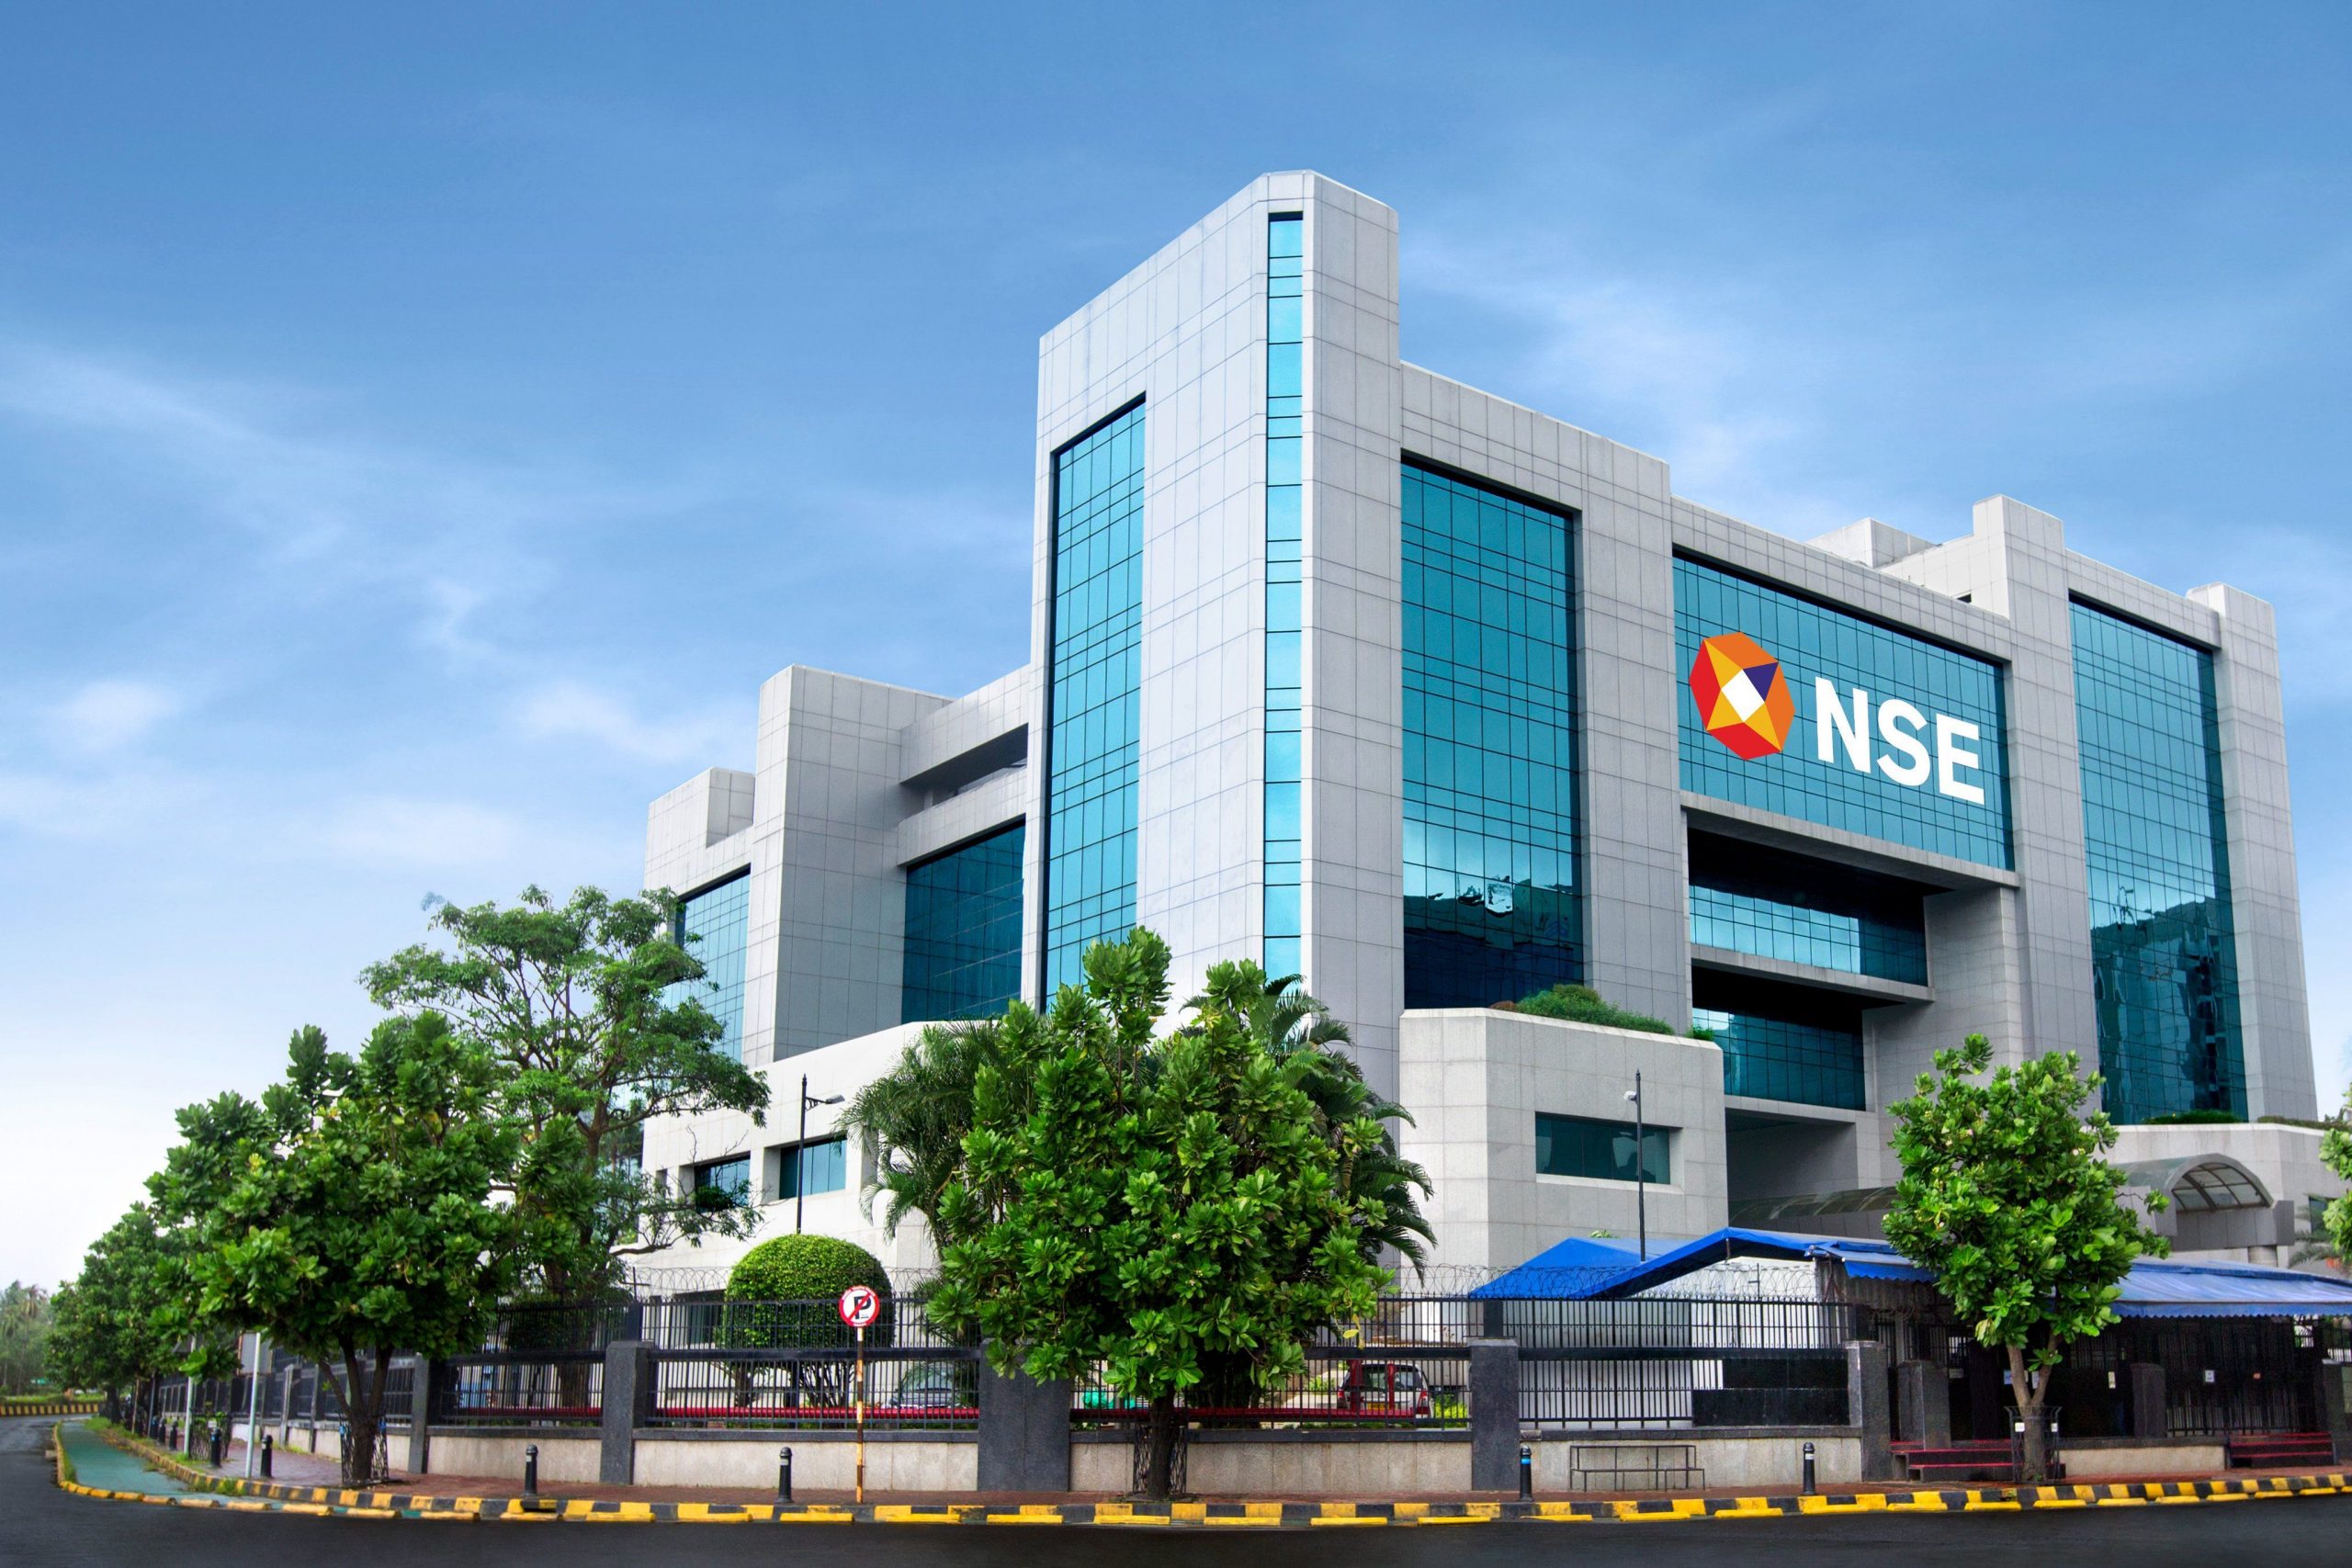 NSE F&O Ban: RBL Bank is under ban on Friday, August 26, 2022